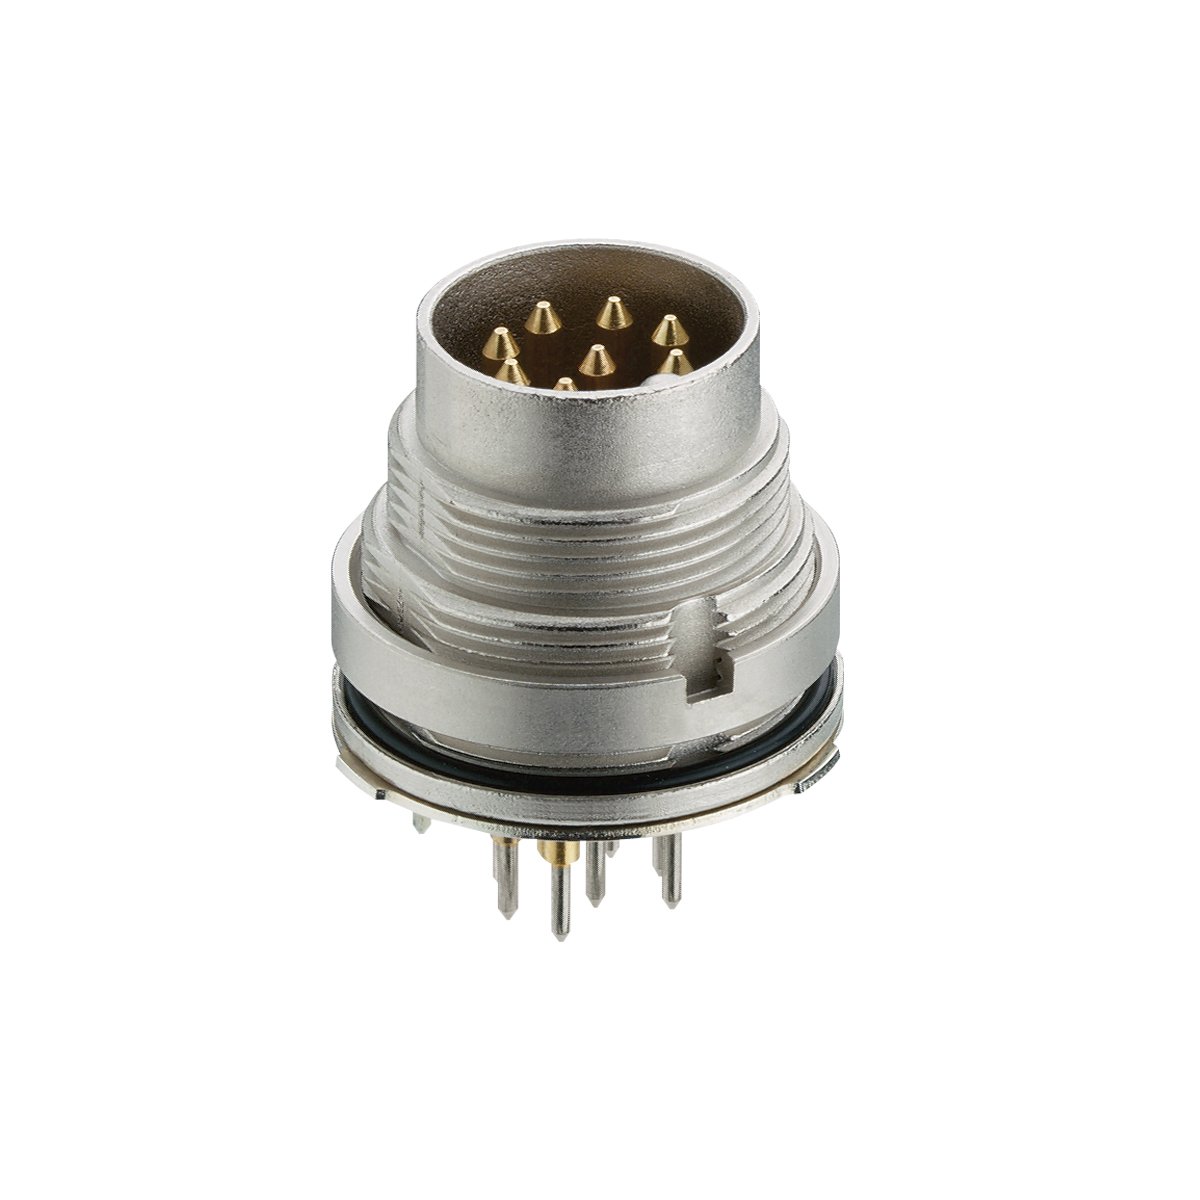 Lumberg: 031798-1 (Series 03 | Circular connectors with threaded joint M16 acc. to IEC 61076-2-106, IP40/IP68)